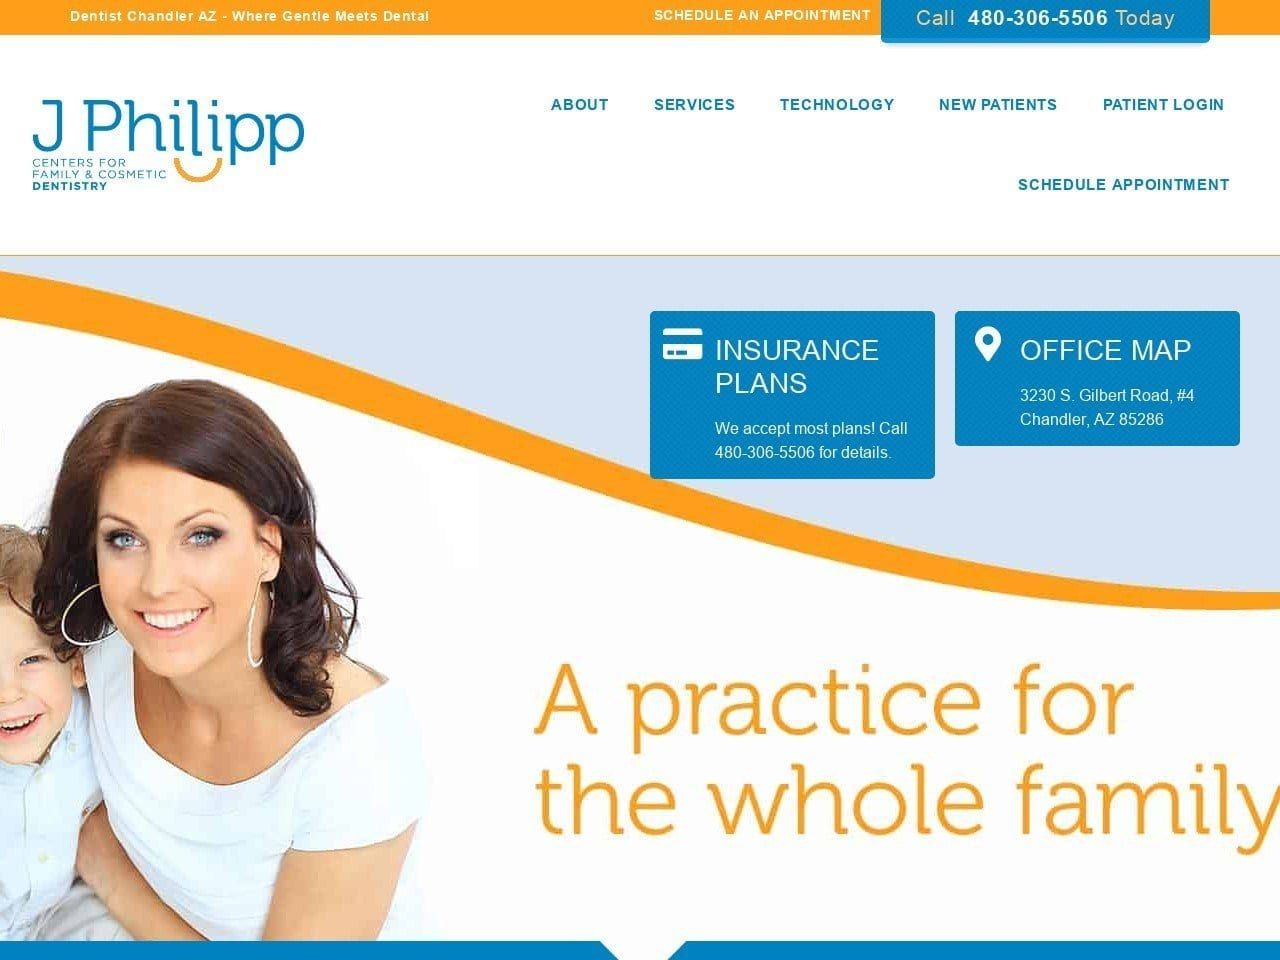 J. Philipp Centers For Family And Cosmetic Dentist Website Screenshot from jphilipp.com